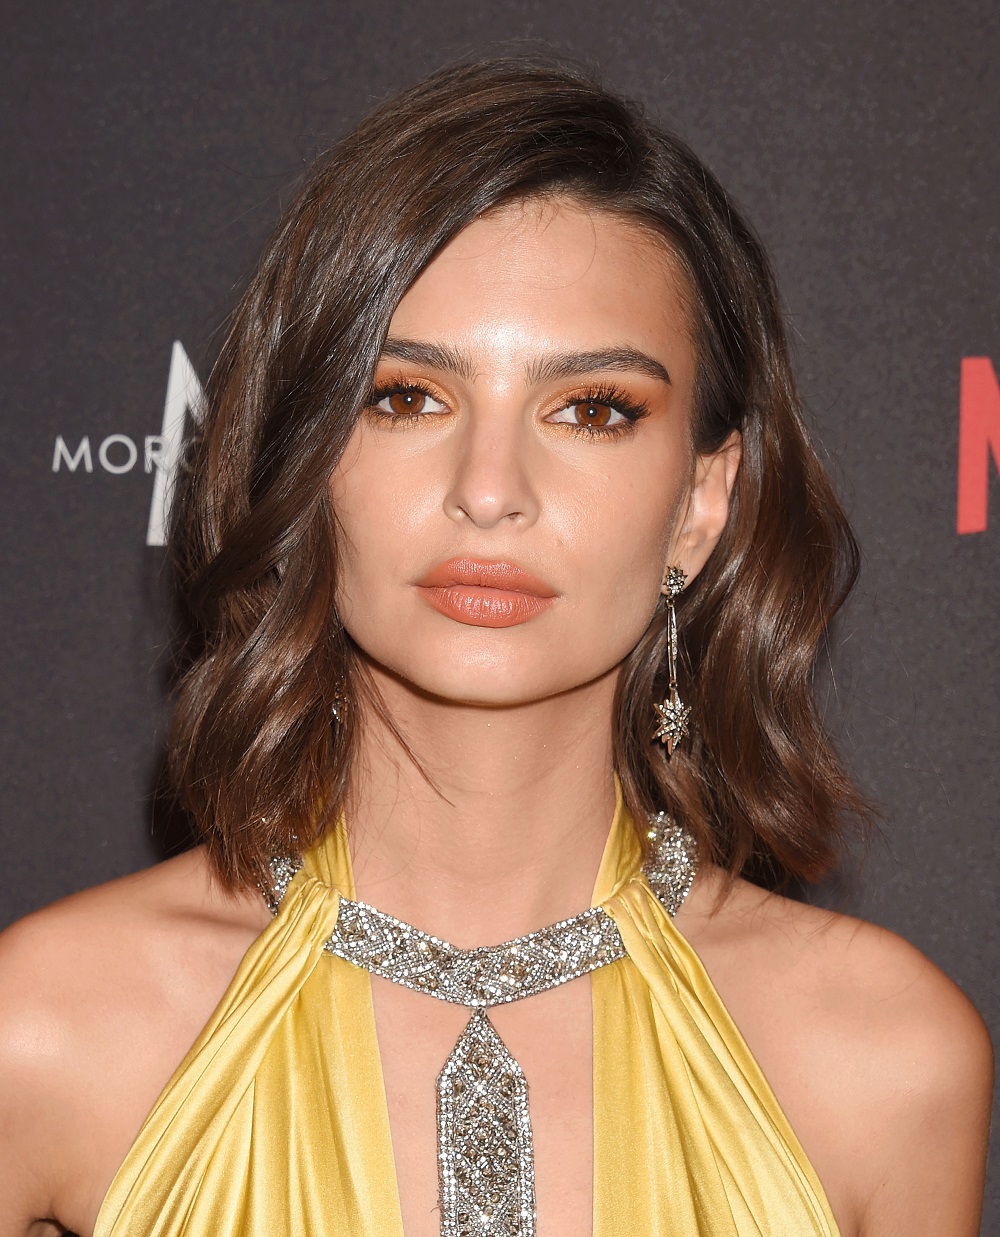 Emily Ratajkowski attends The Weinstein Company and Netflix Golden Globe Party wearing a golden dress with a wavy bob hairstyle.